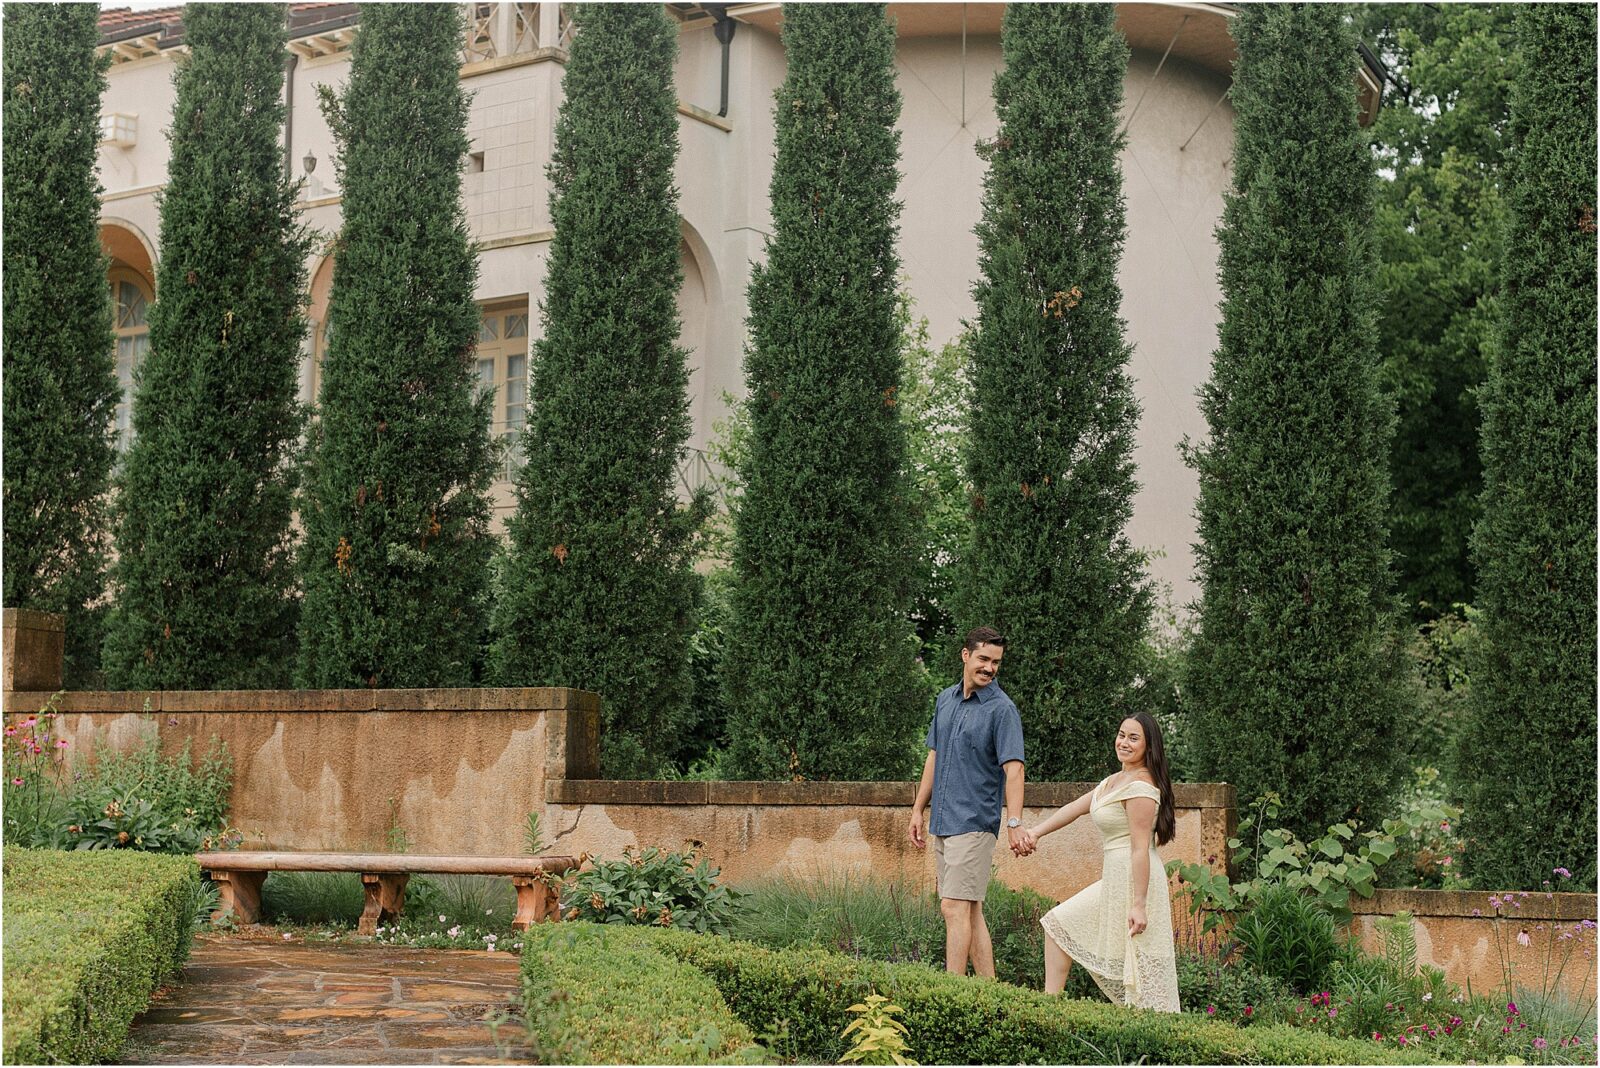 Marie and Mark walking along the Italian spruce trees of the Tuscan inspired gardens during their rainy engagement session at the philbrook museum.